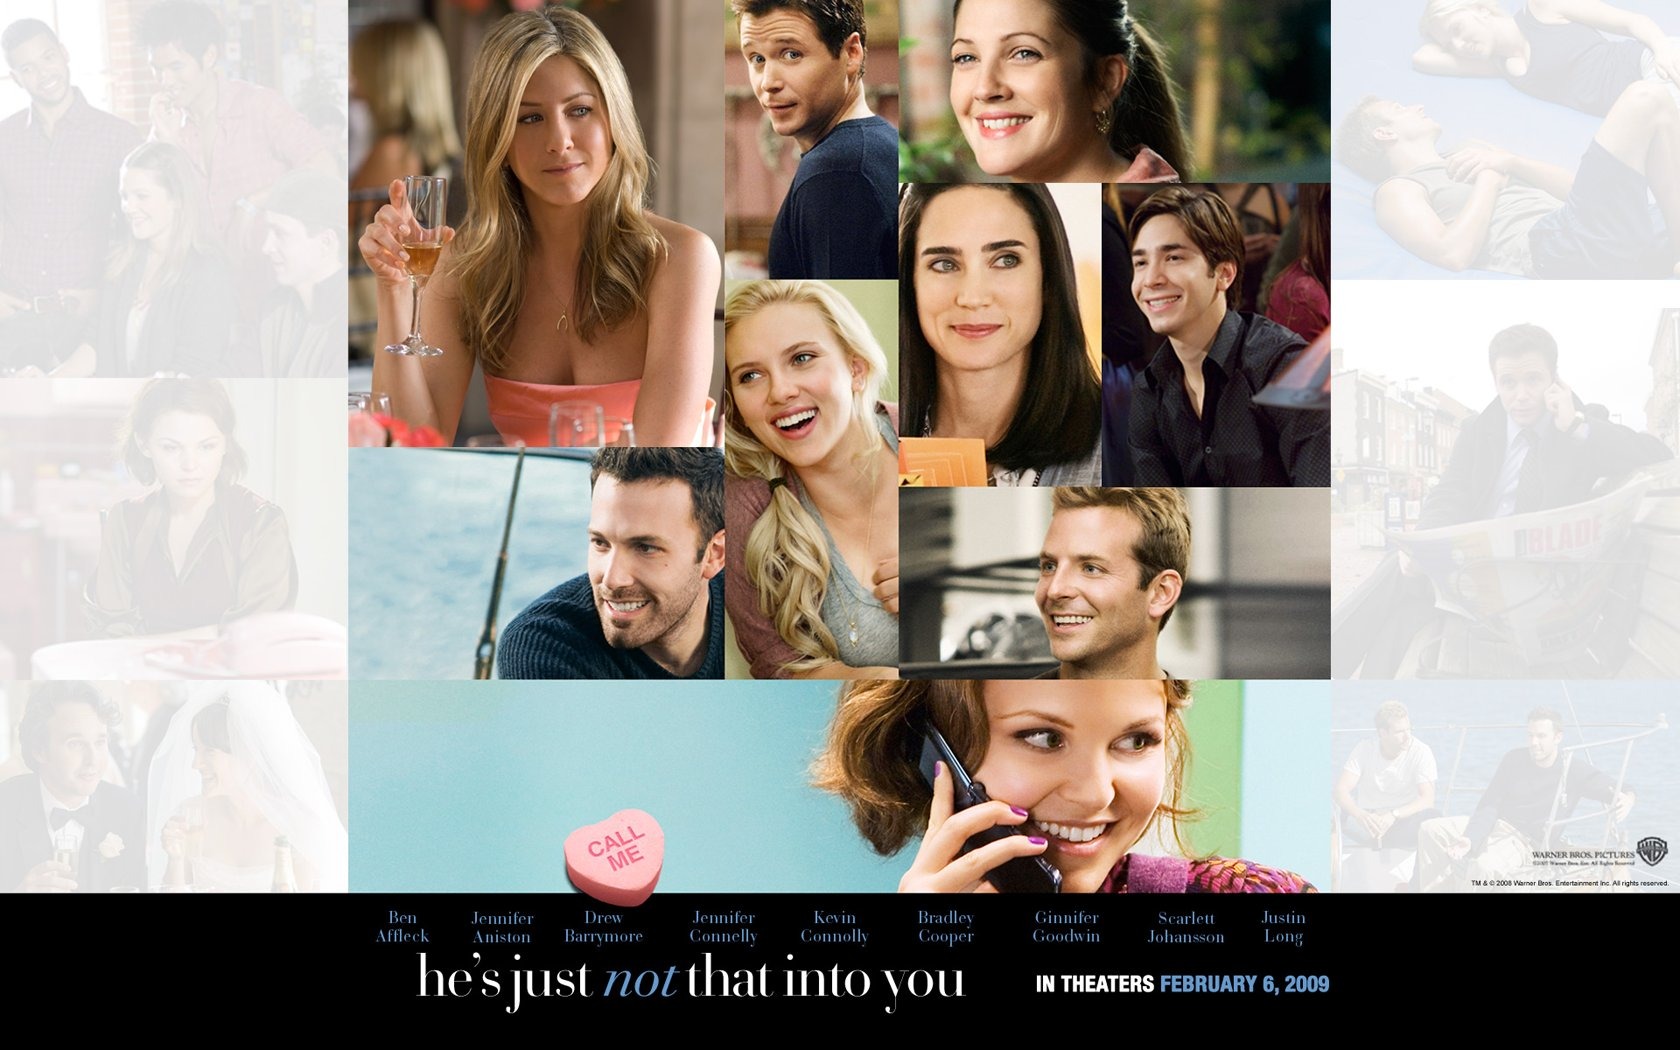 He's Just Not That Into You wallpaper #5 - 1680x1050